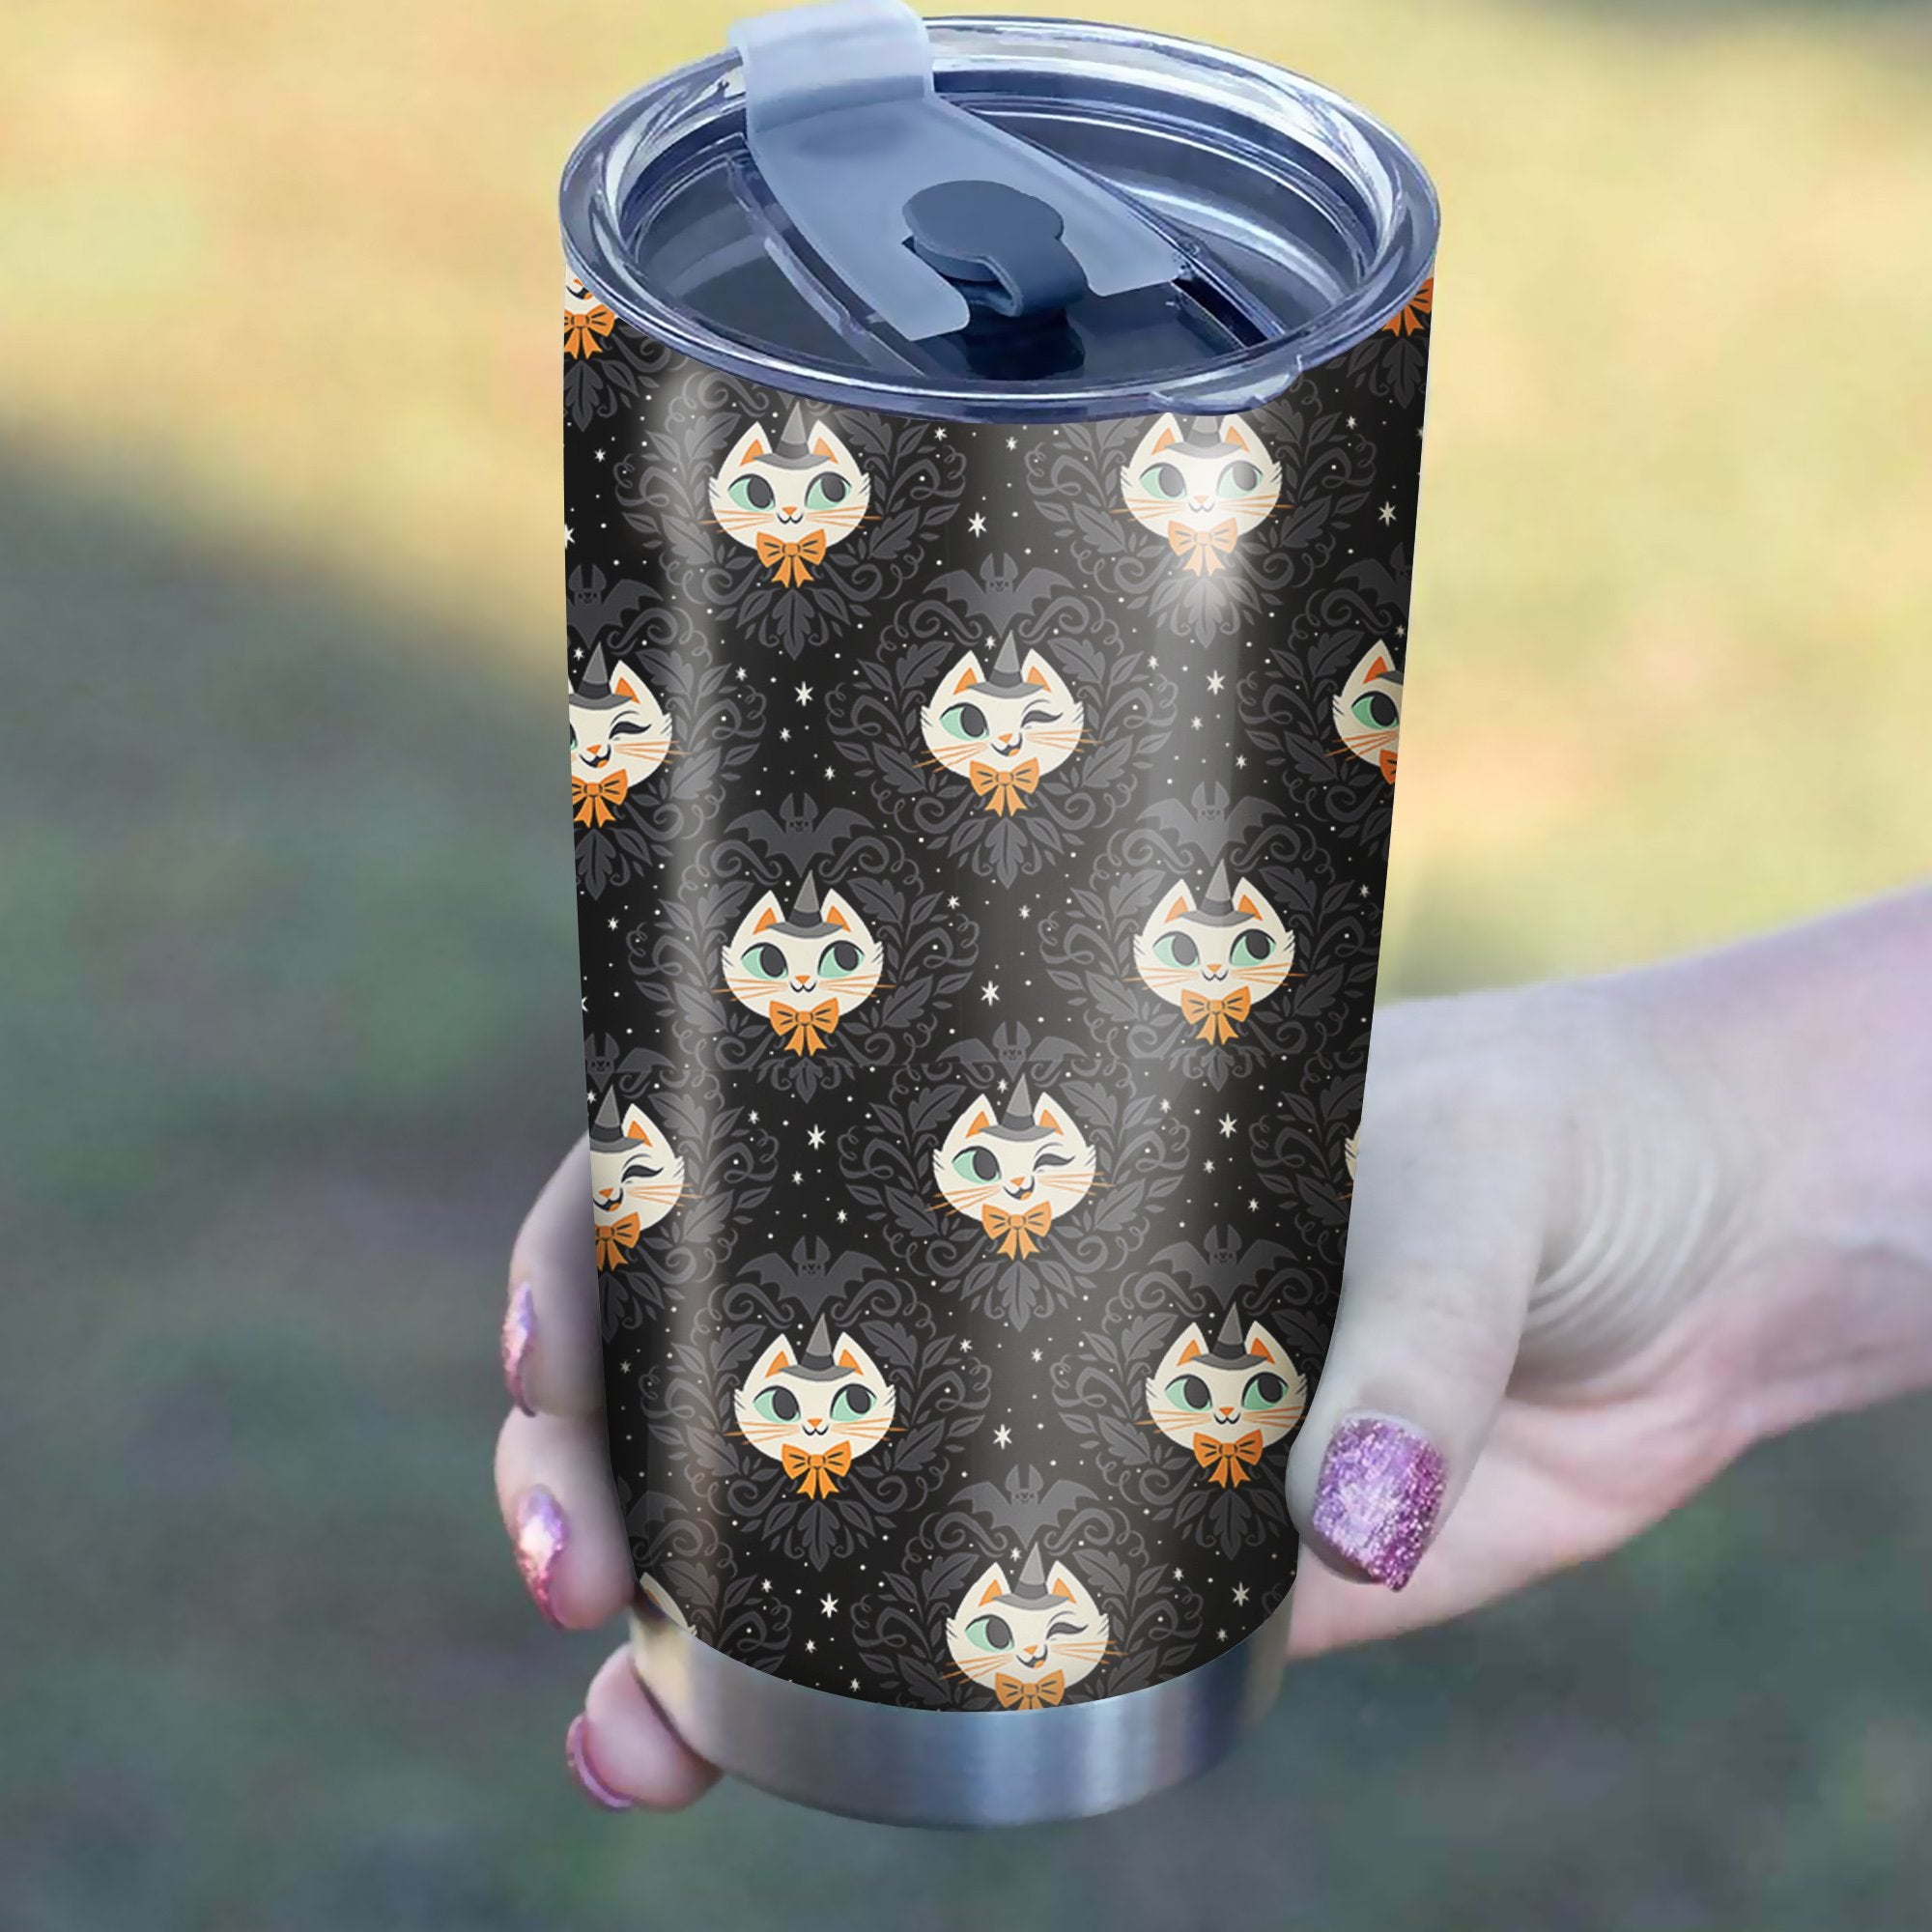 Cat Cartoon Face Pattern Tumbler Best Perfect Gift Idea Stainless Traveling Mugs 2021